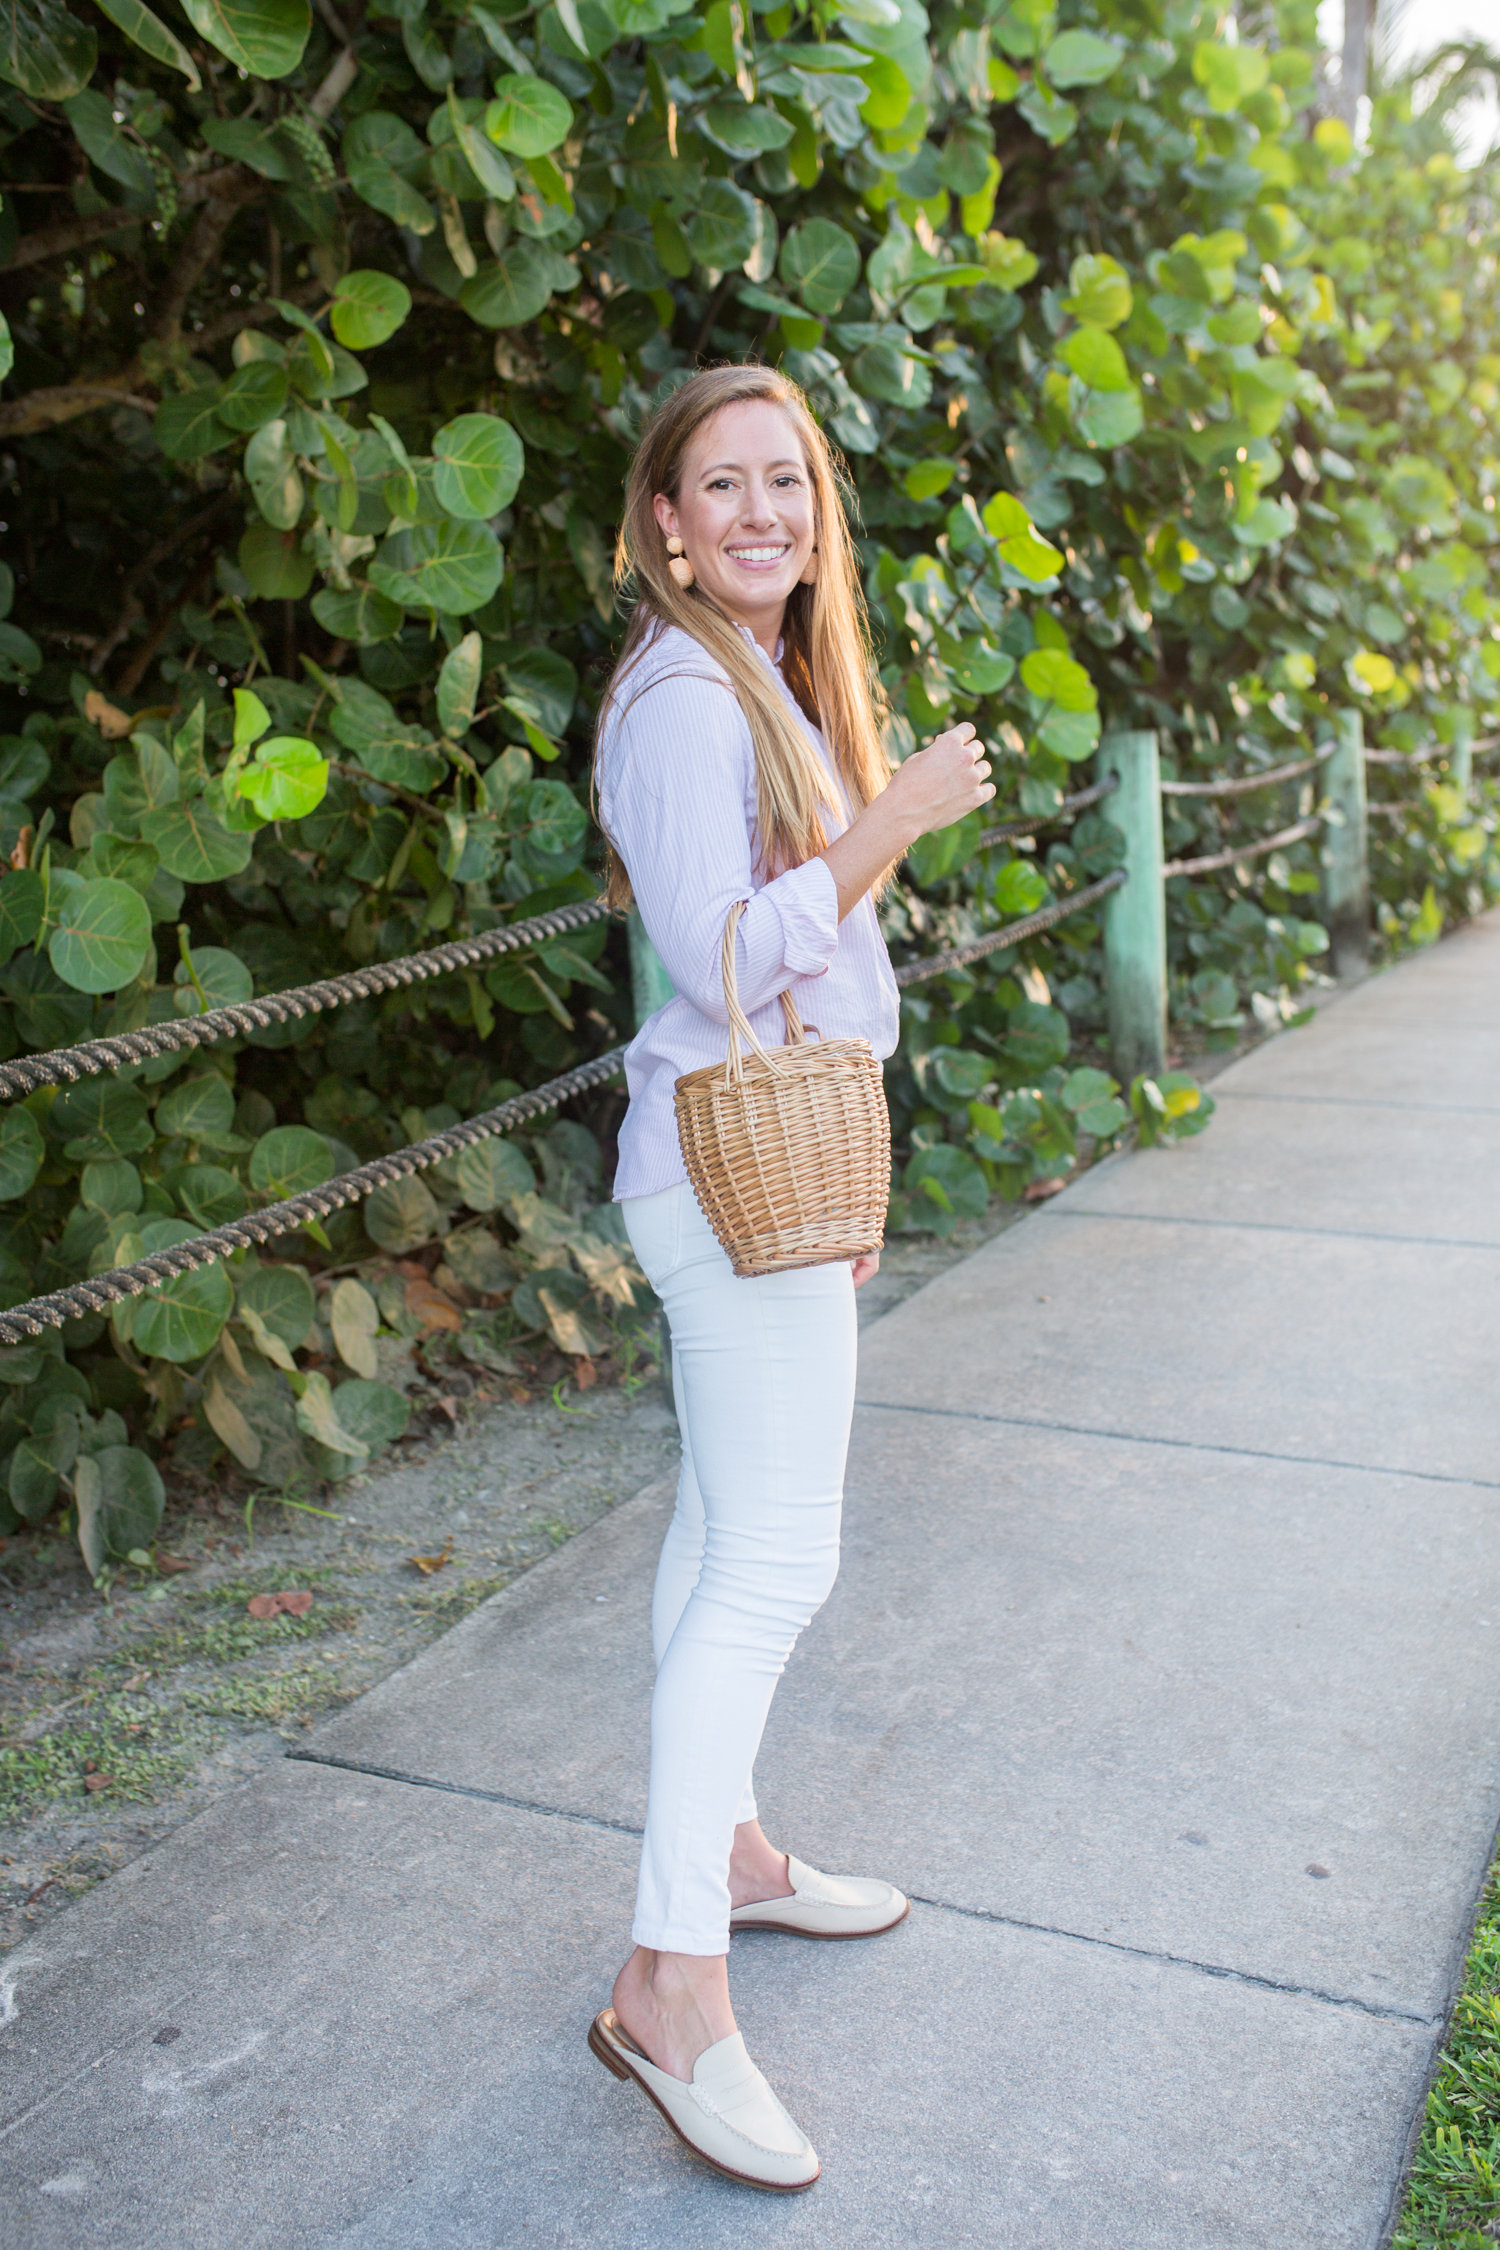 Striped Button Down Oxford Top / Fall Outfit Inspiration / Preppy Outfit 
/ White Skinny Jeans / Sperry Mules / Loafers / Early Fall Outfit / Fall Transition Outfit - Sunshine Style, A Preppy Fashion and Coastal Lifestyle blog by Katie